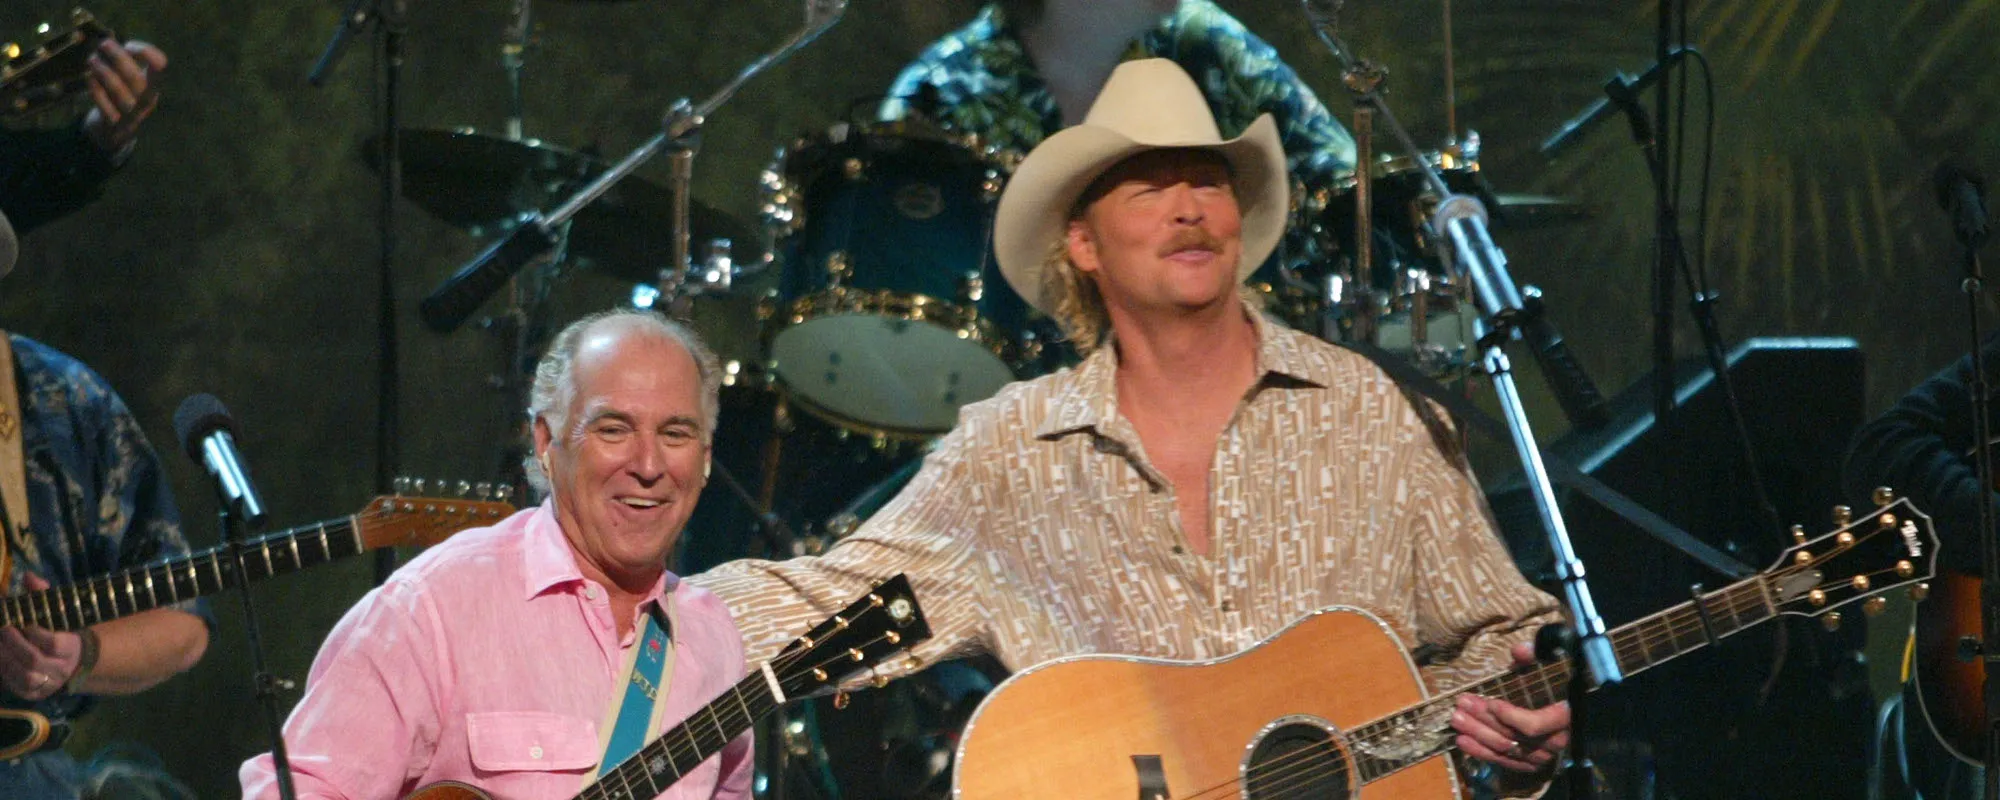 The Story Behind “It’s Five O’Clock Somewhere” by Alan Jackson and Jimmy Buffett